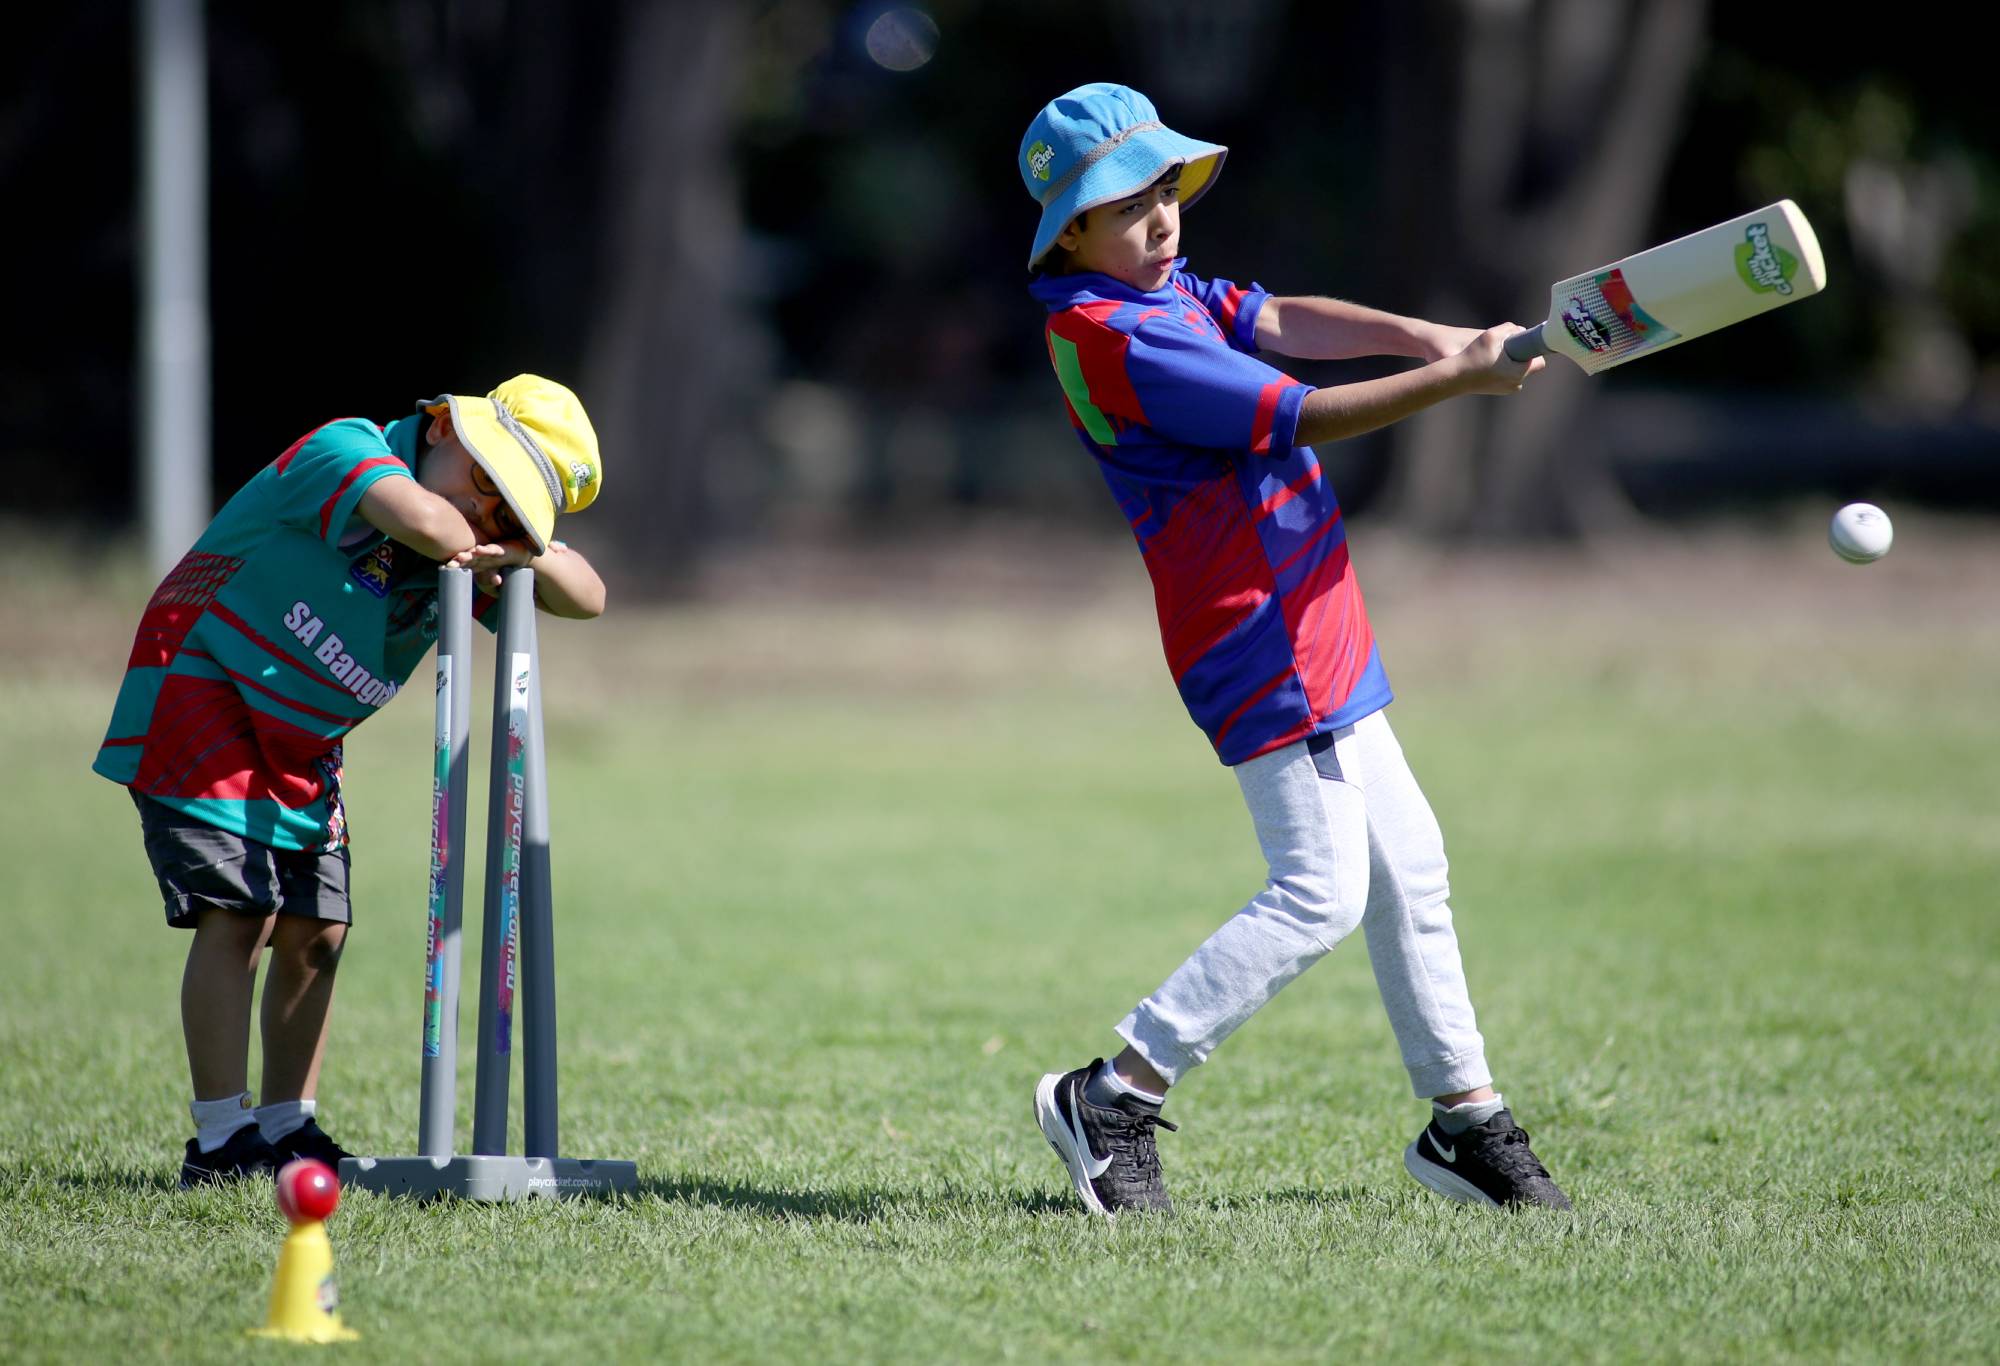 ADELAIDE, AUSTRALIA - OCTOBER 11:  A young boy from the Bangladesh team rests his head as an Afghanistan team member hits the ball at theSouth Australian Cricket Association Junior World Cup at the Fitzroy Cricket Club on October 11, 2020 in Adelaide, Australia. (Photo by Kelly Barnes/Getty Images)